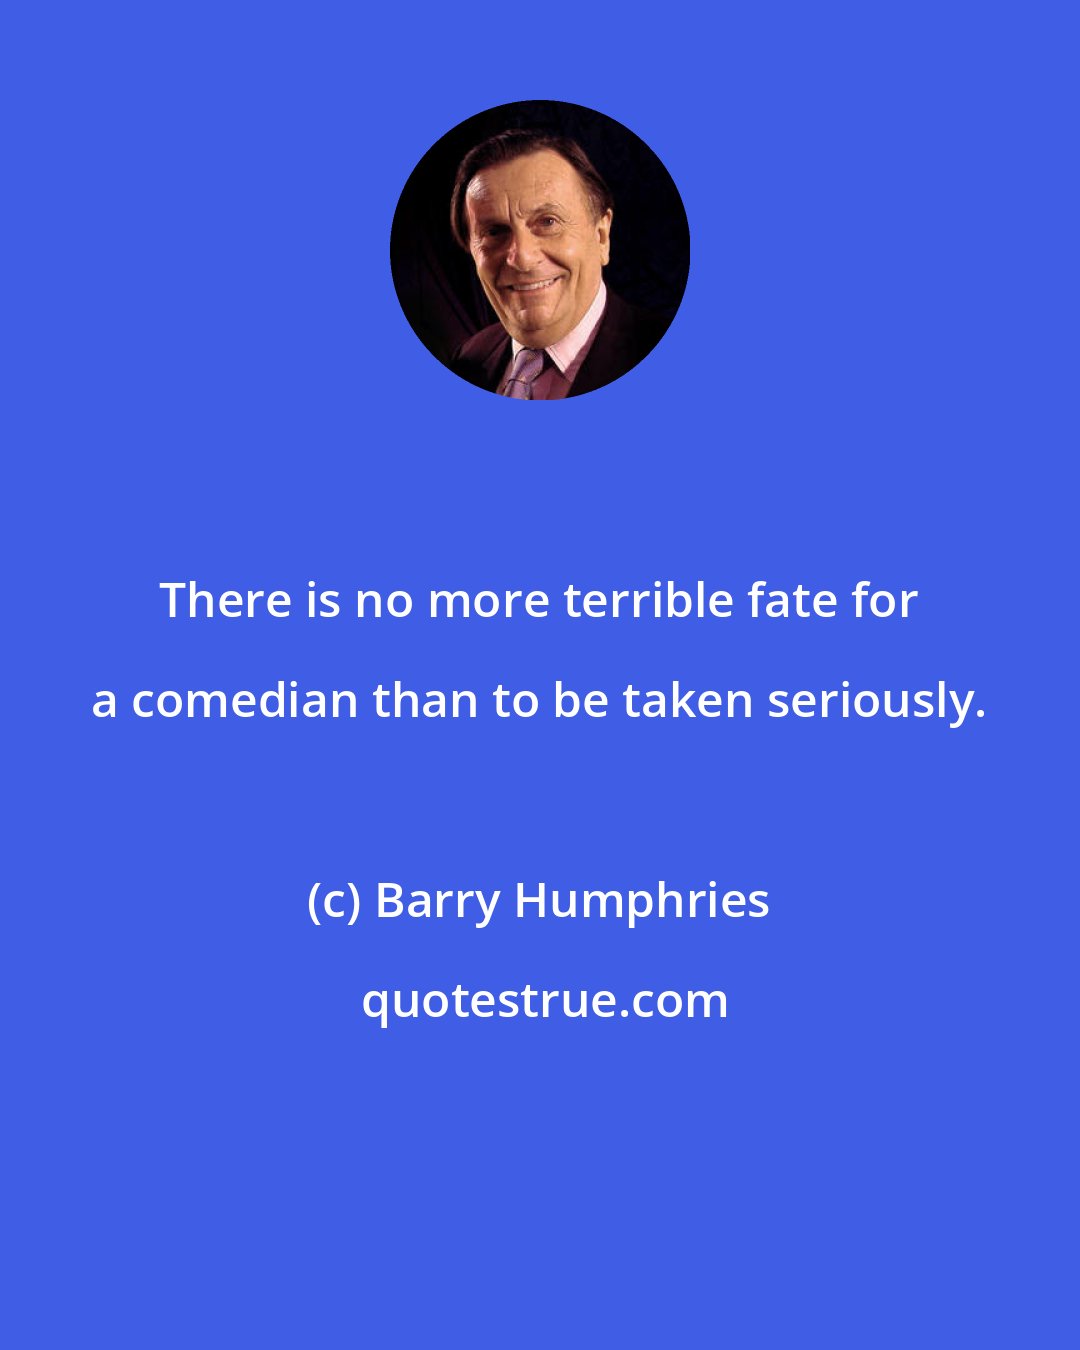 Barry Humphries: There is no more terrible fate for a comedian than to be taken seriously.